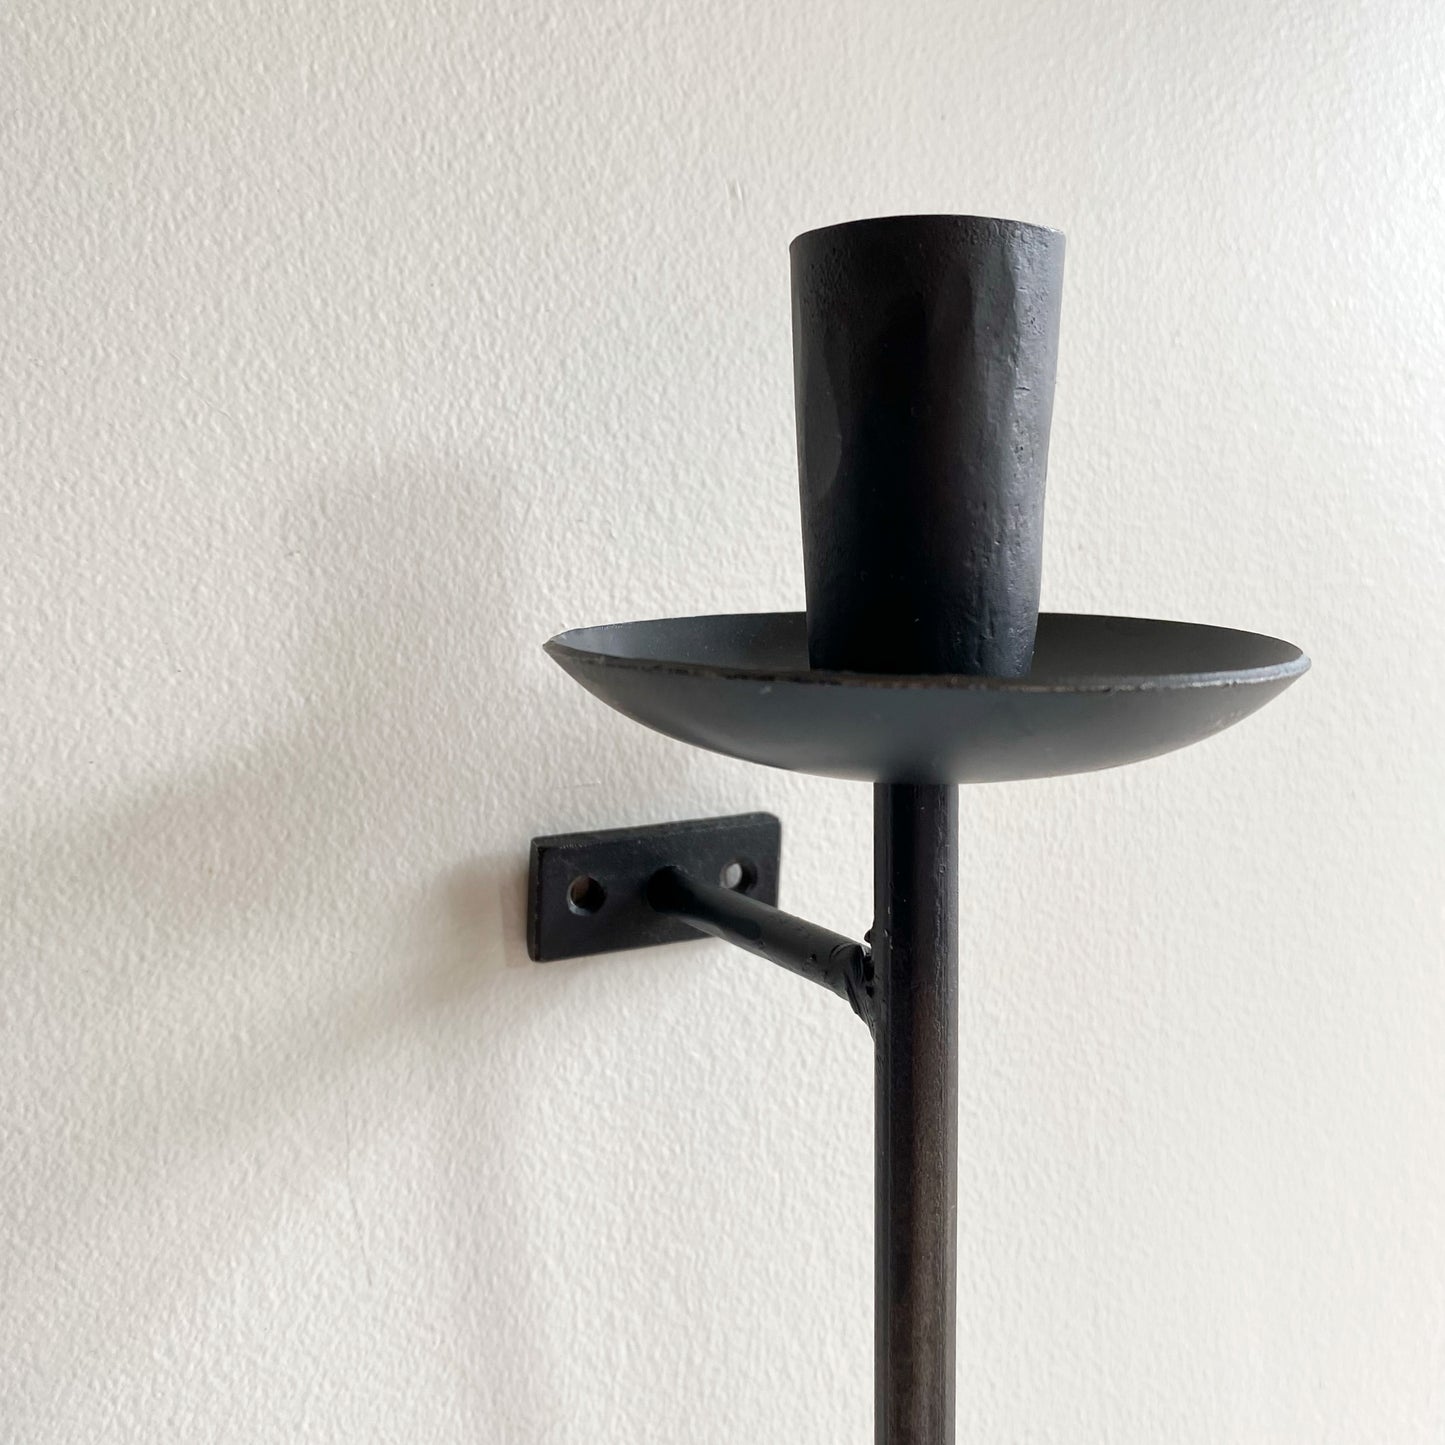 Found Slender Iron Wall Candle Sconce, Single